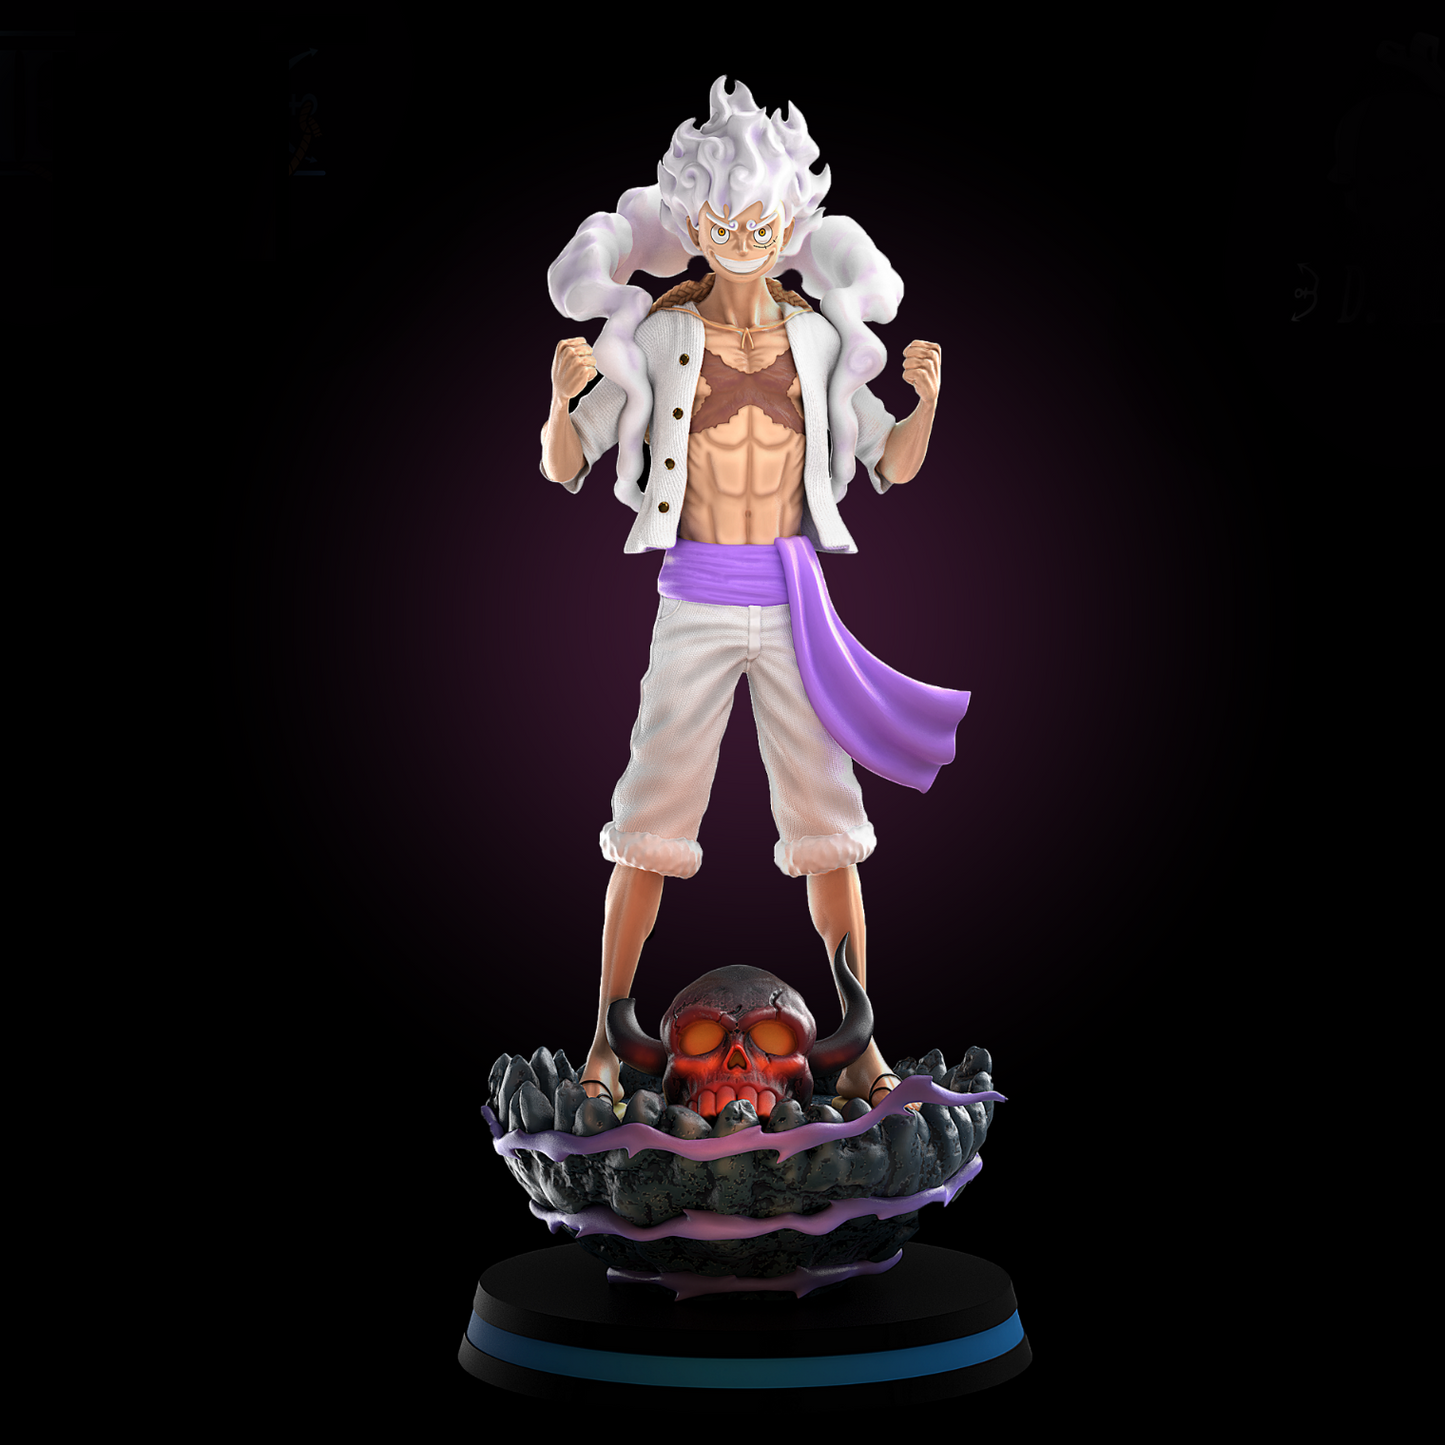 Luffy STL File 3D Printing Design File Anime One Piece Character 0119